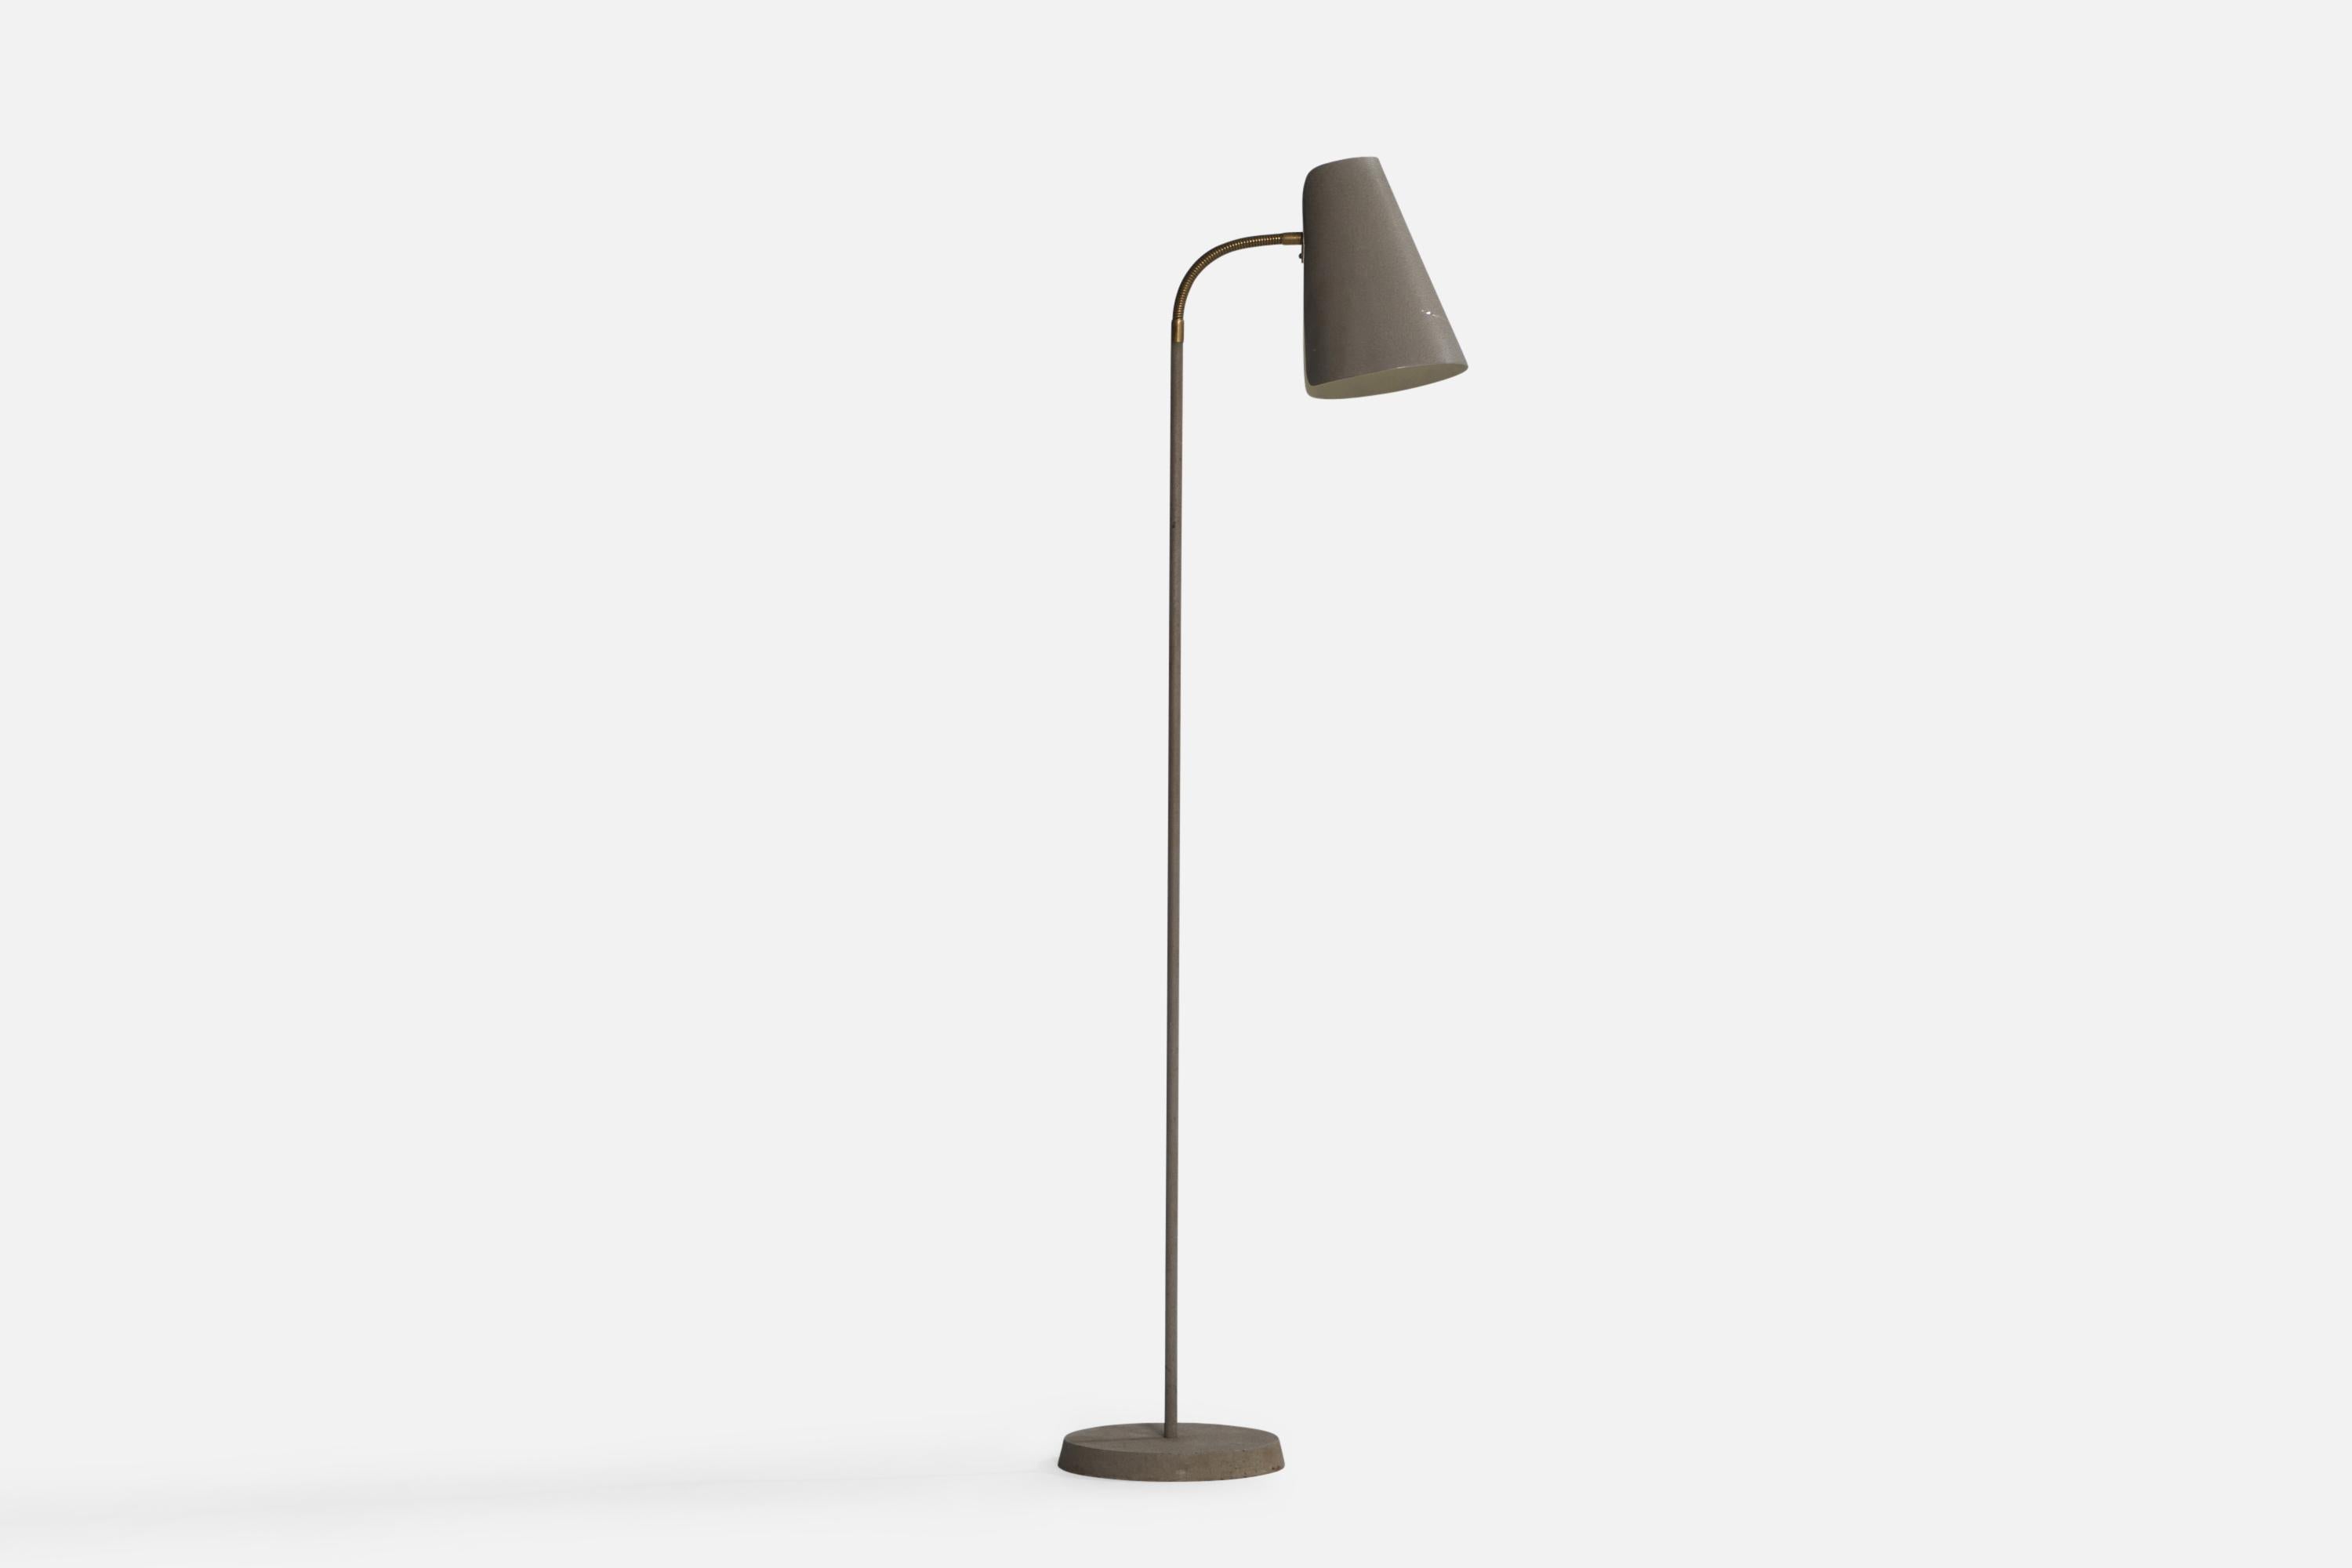 A brass and grey-lacquered metal floor lamp designed and produced by Böhlmark, Sweden, c. 1940s.

Overall Dimensions (inches): 51.3” H x 8.7” W x 15.75” D. Stated dimensions include shade.
Dimensions vary based on position of light.
Bulb